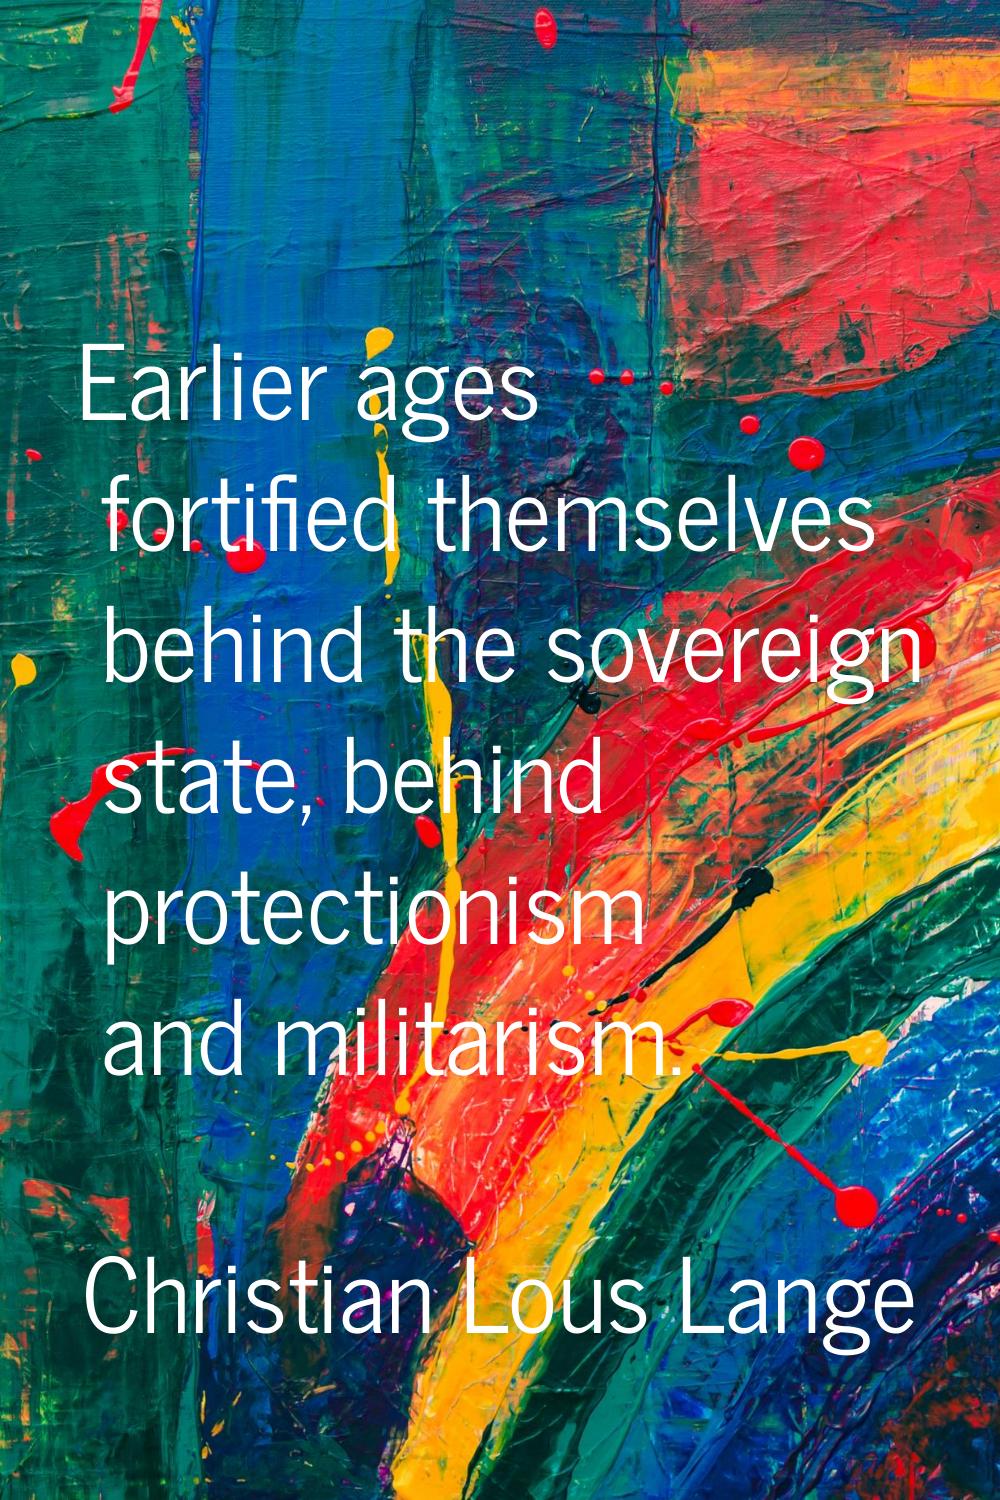 Earlier ages fortified themselves behind the sovereign state, behind protectionism and militarism.